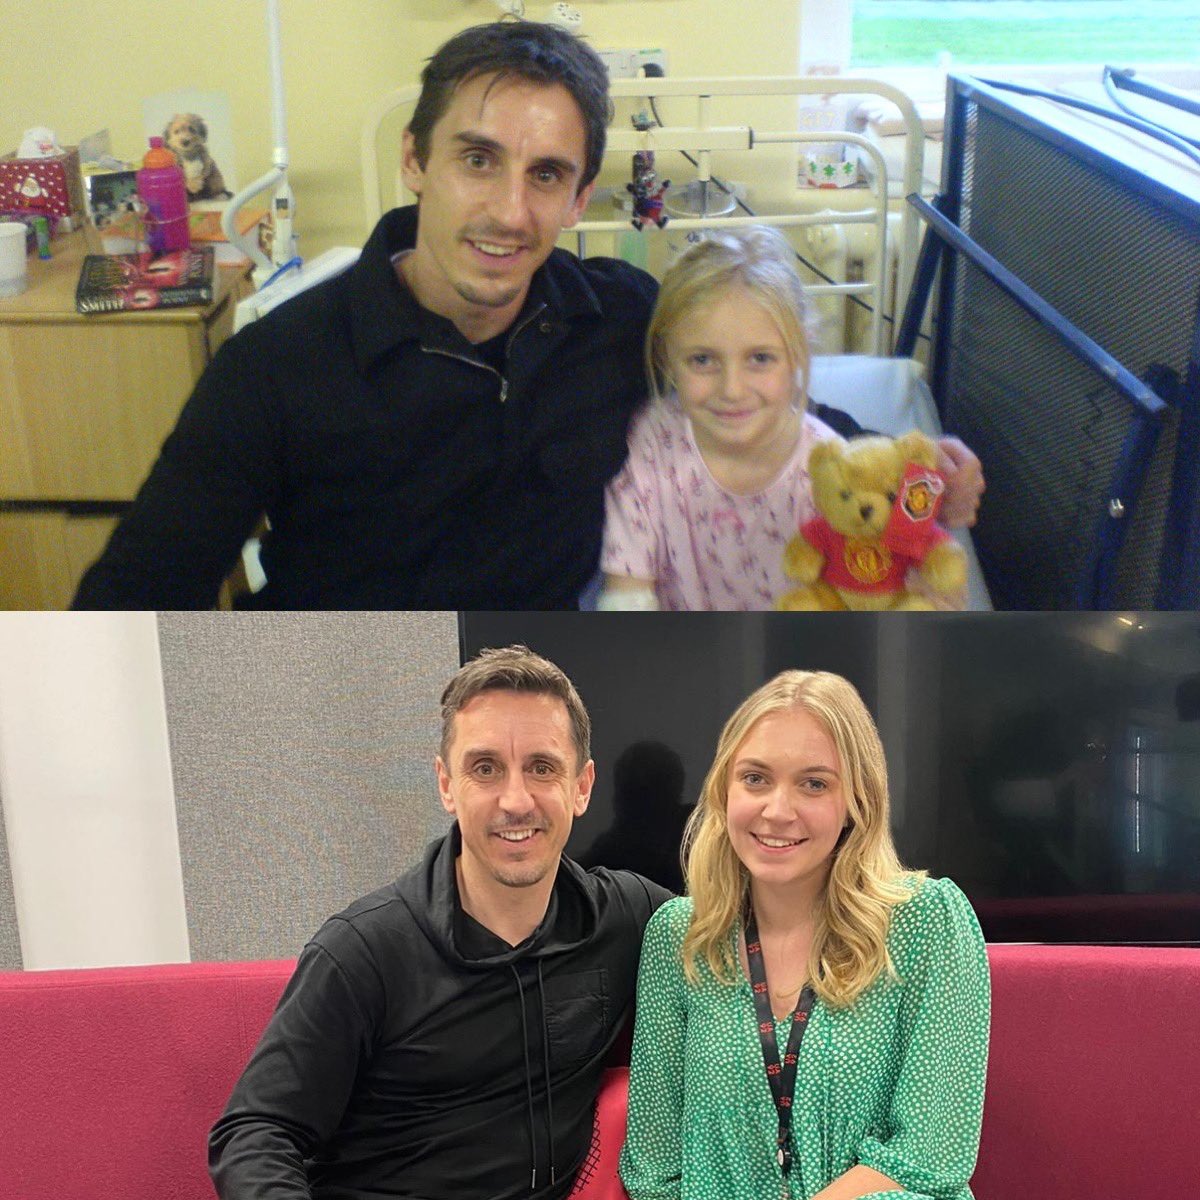 On this day 15 years ago, @GNev2 walked into the hospital ward of Booth Hall Children’s Hospital where I’d just been diagnosed with Ulcerative Colitis aged 6. 

Today, I work at @UA92MCR, the higher education institution he is co-founder of. 

Life works in very mysterious ways!